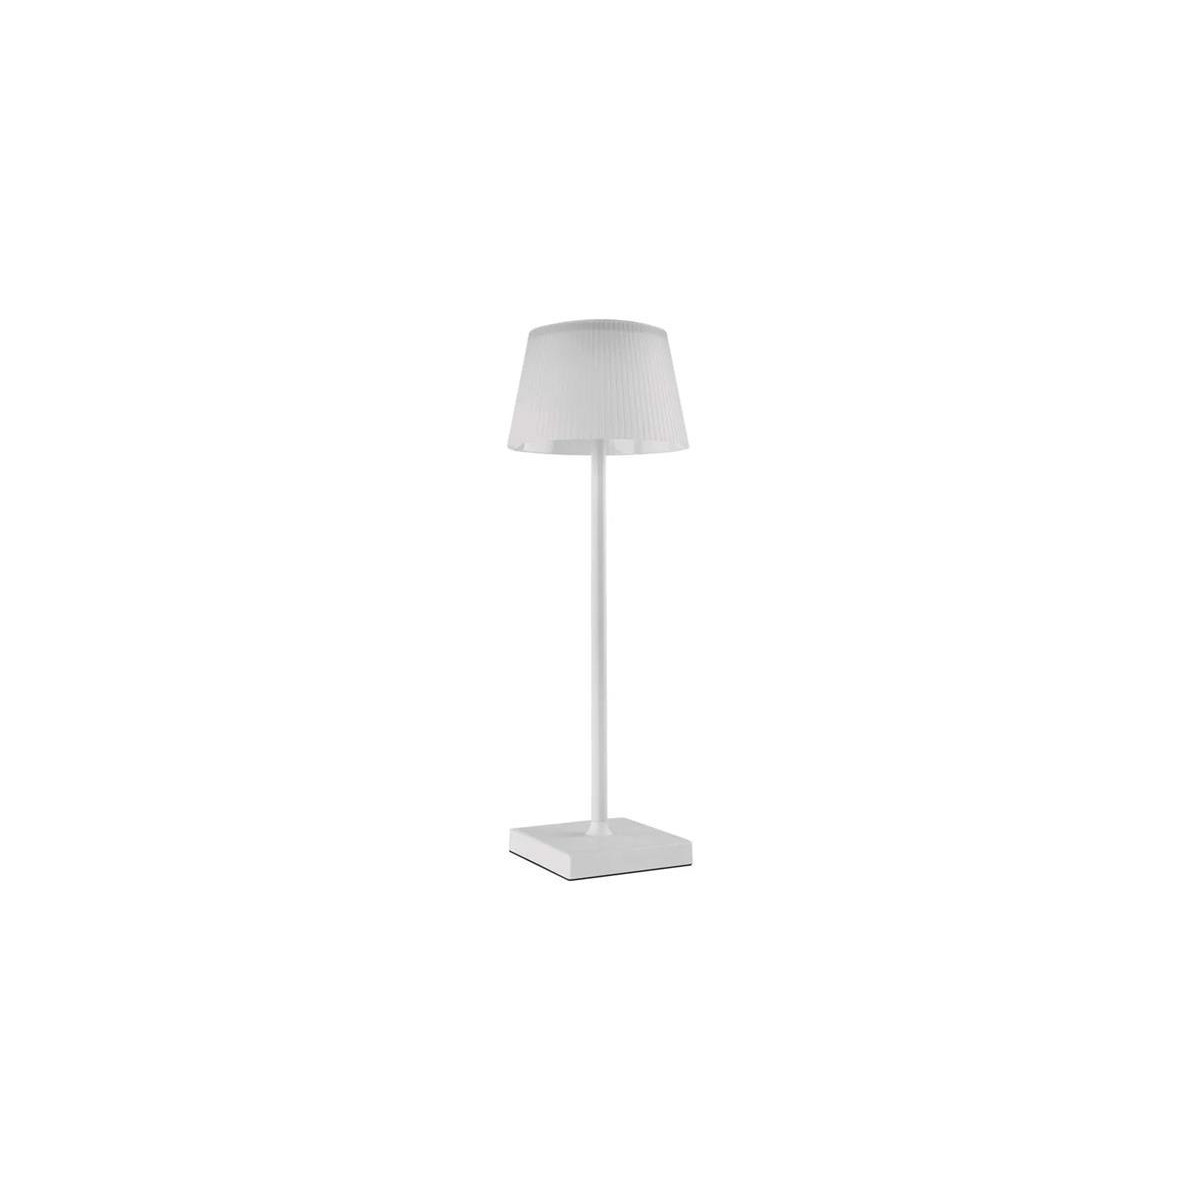 More about Lampa stolní EMOS Z7630W KATIE